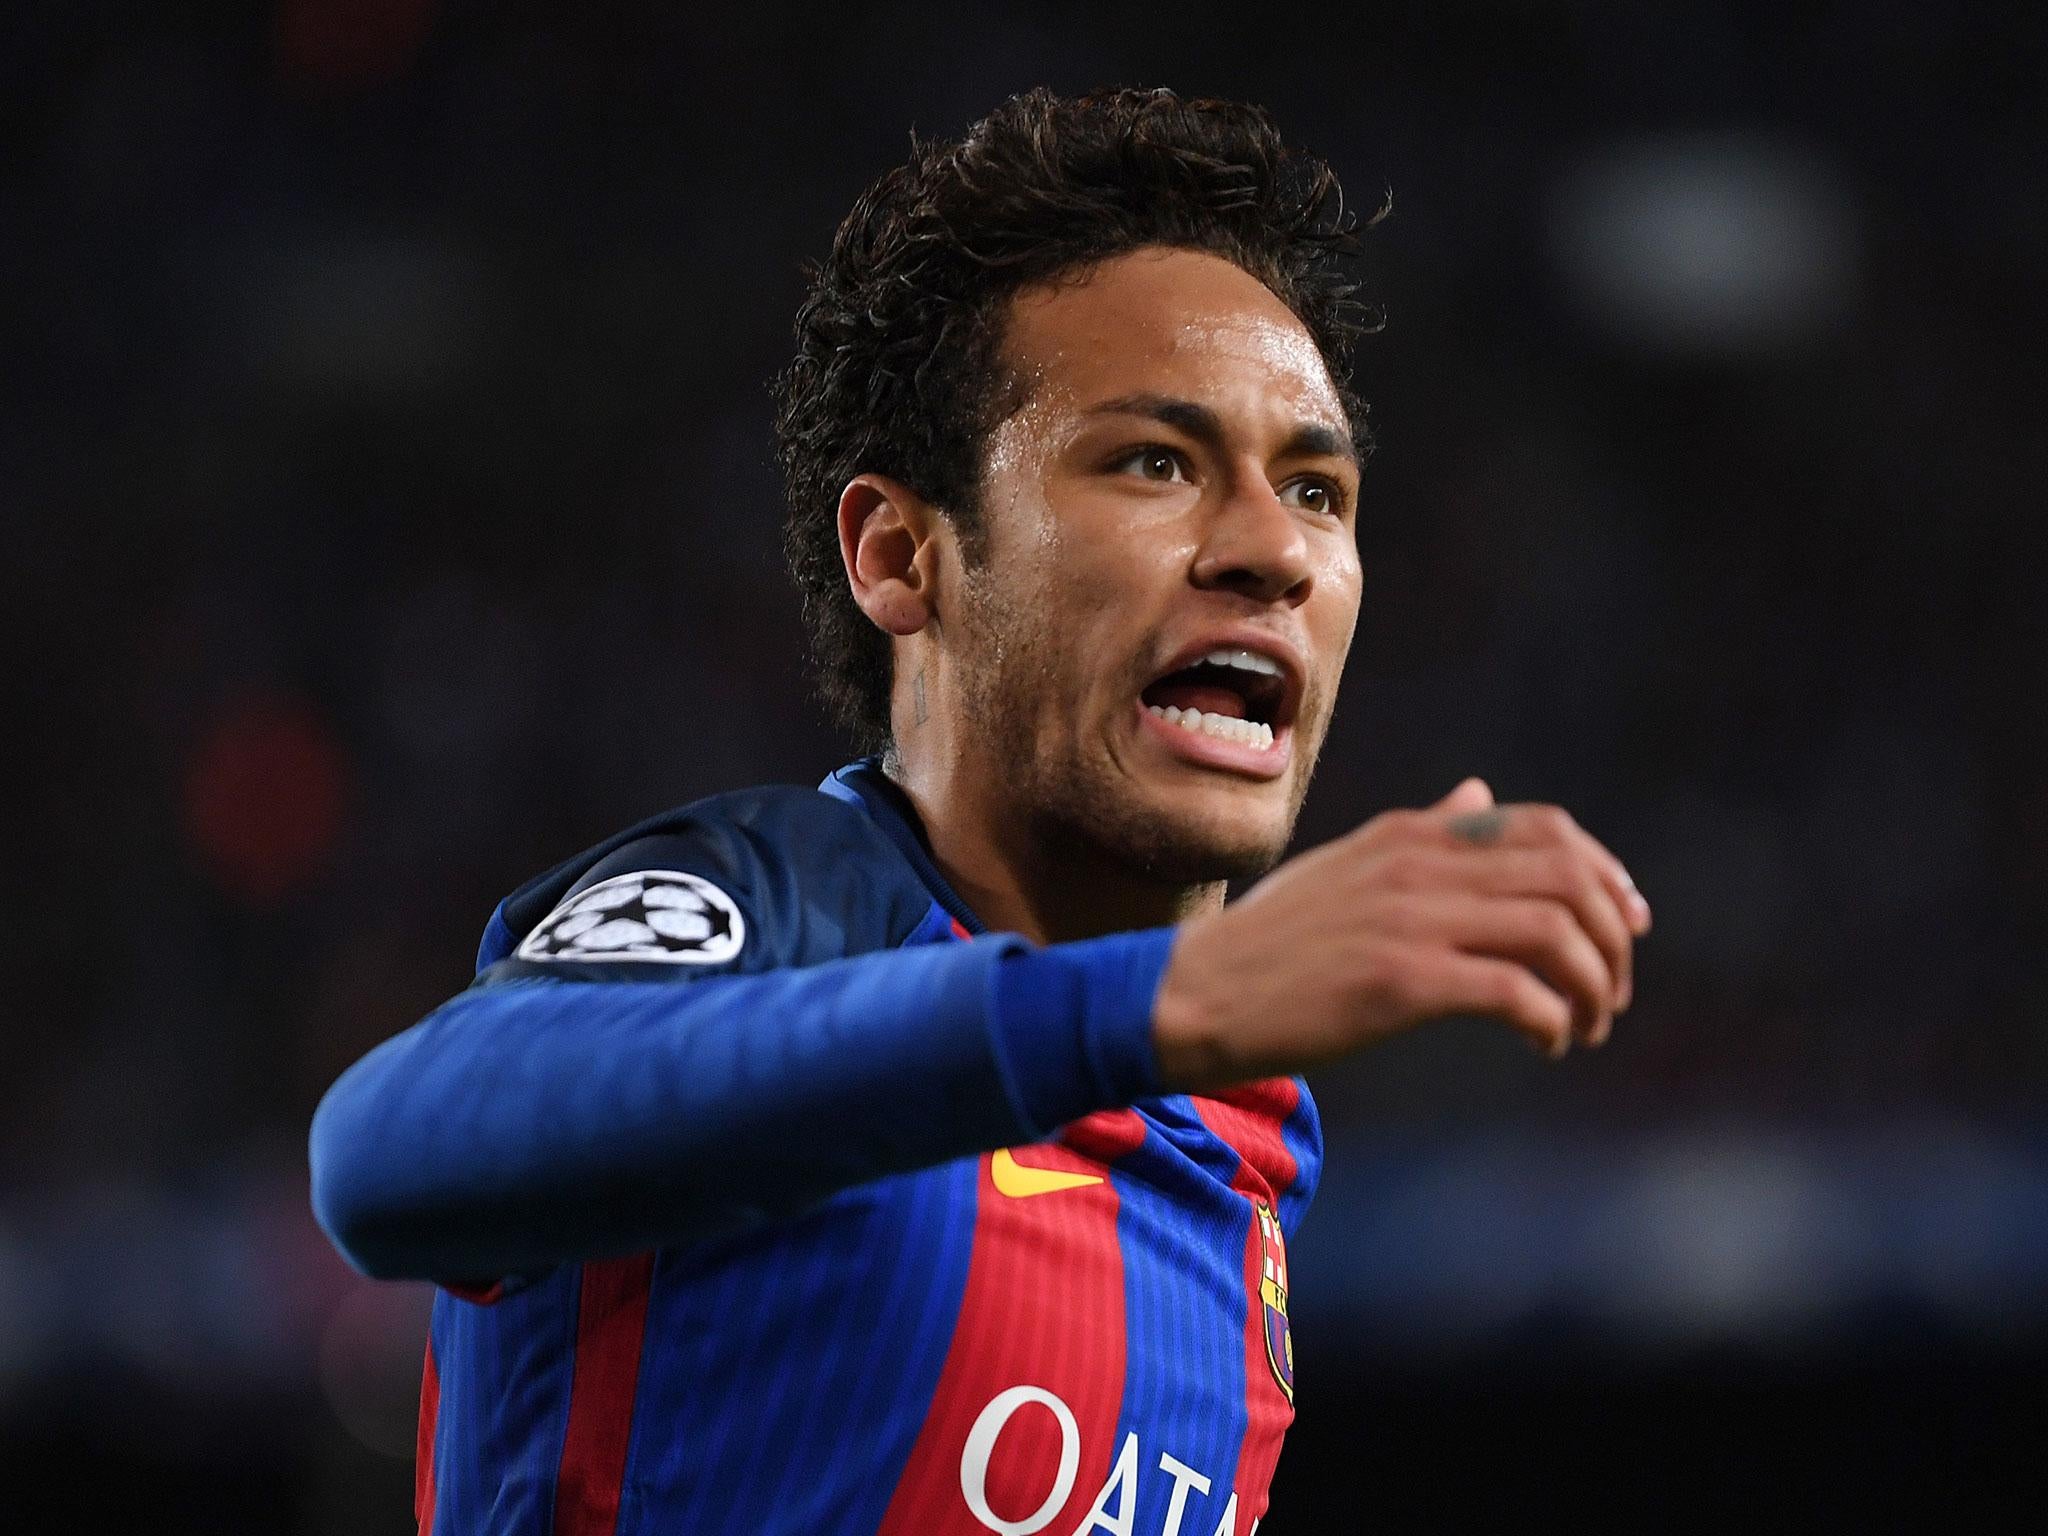 Neymar has been cleared of fraud charges over his transfer from Santos to Barcelona in 2013